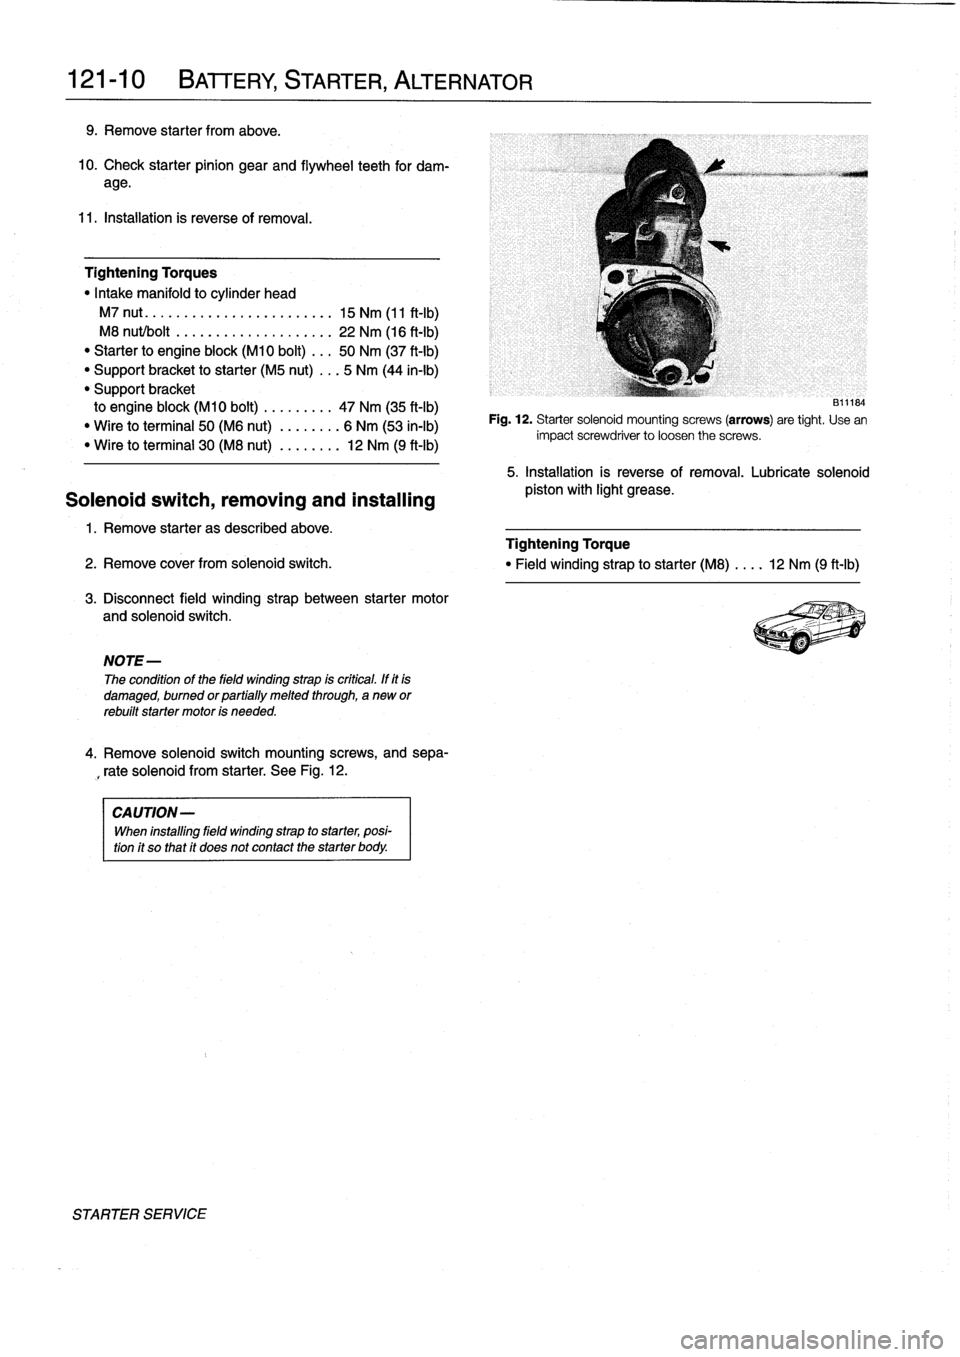 BMW 328i 1995 E36 Owners Manual 
121-1
O

	

BATTERY,
STARTER,
ALTERNATOR

9
.
Remove
starter
from
above
.

10
.
Check
starter
pinion
gear
and
flywheel
teeth
for
dam-
age
.

11
.
Installation
is
reverse
of
removal
.

Tightening
Torq